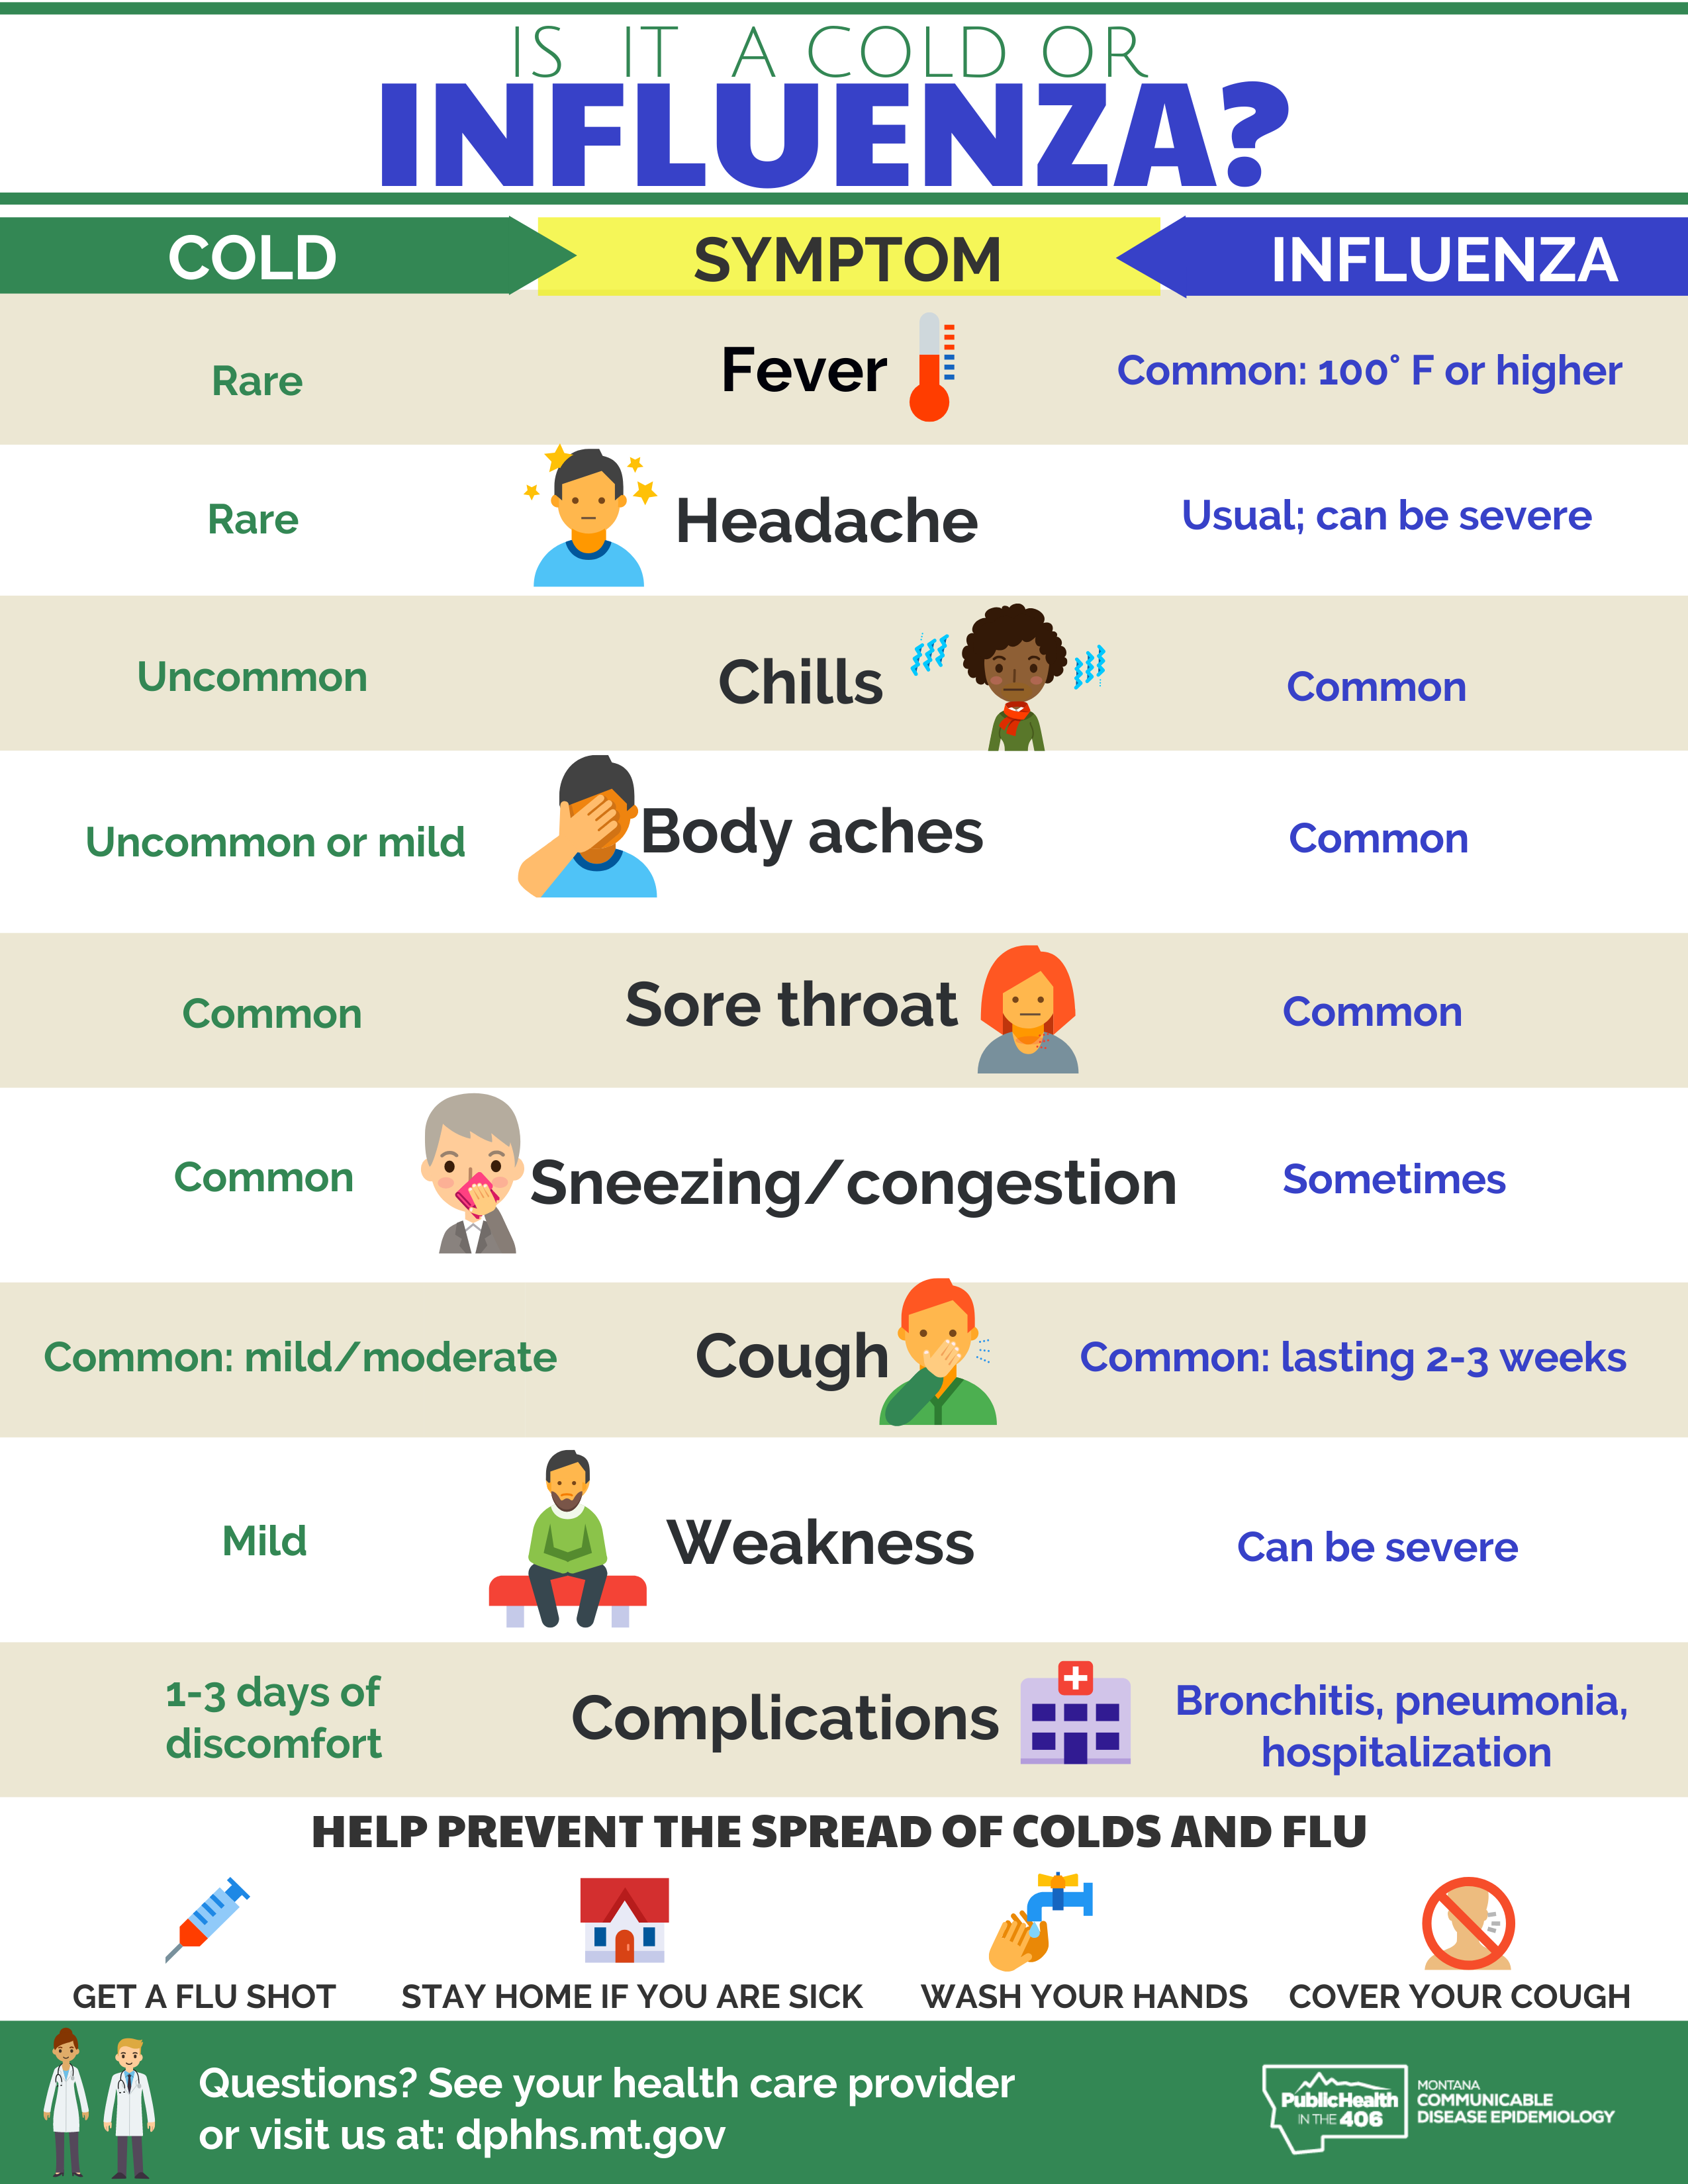 is it a cold or is it influenza?